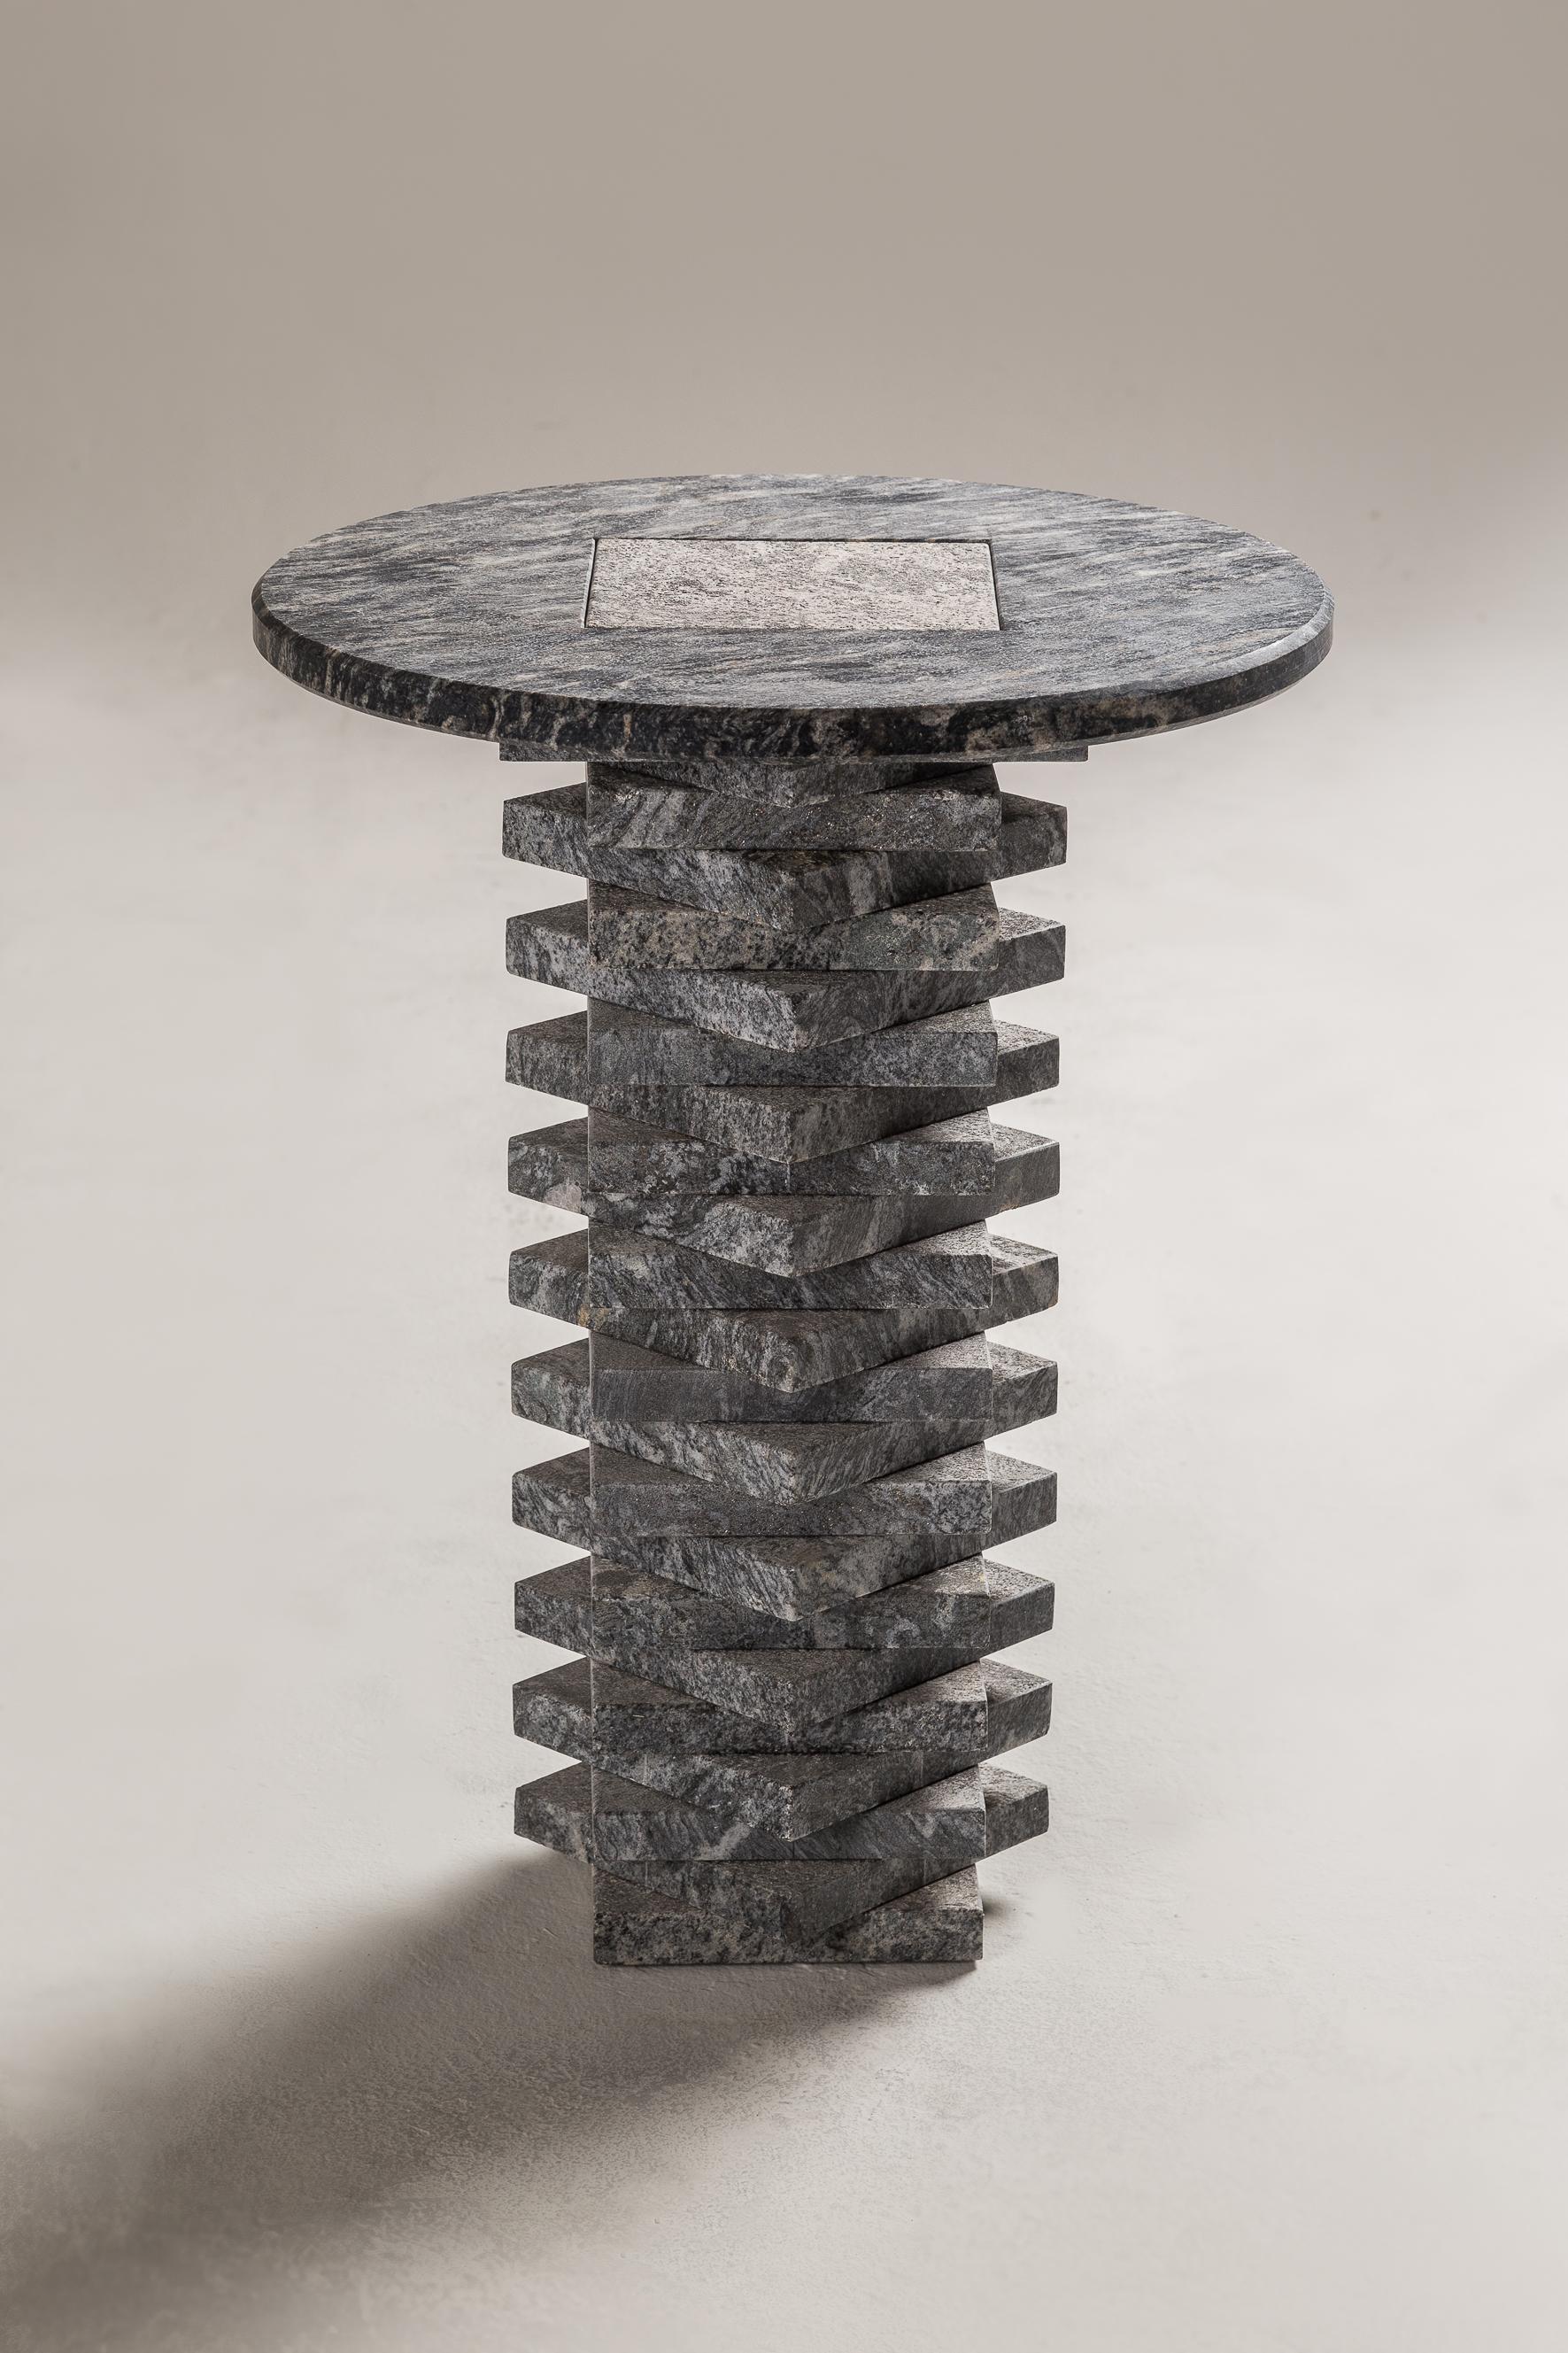 Boreal side table by Cristián Mohaded
Limited edition
Dimensions: 50 D x 52 H cm
Materials: brushed boreal granite

This brutalist table combines its elements mathematically to create a three-dimensional texture. The use of different finishes